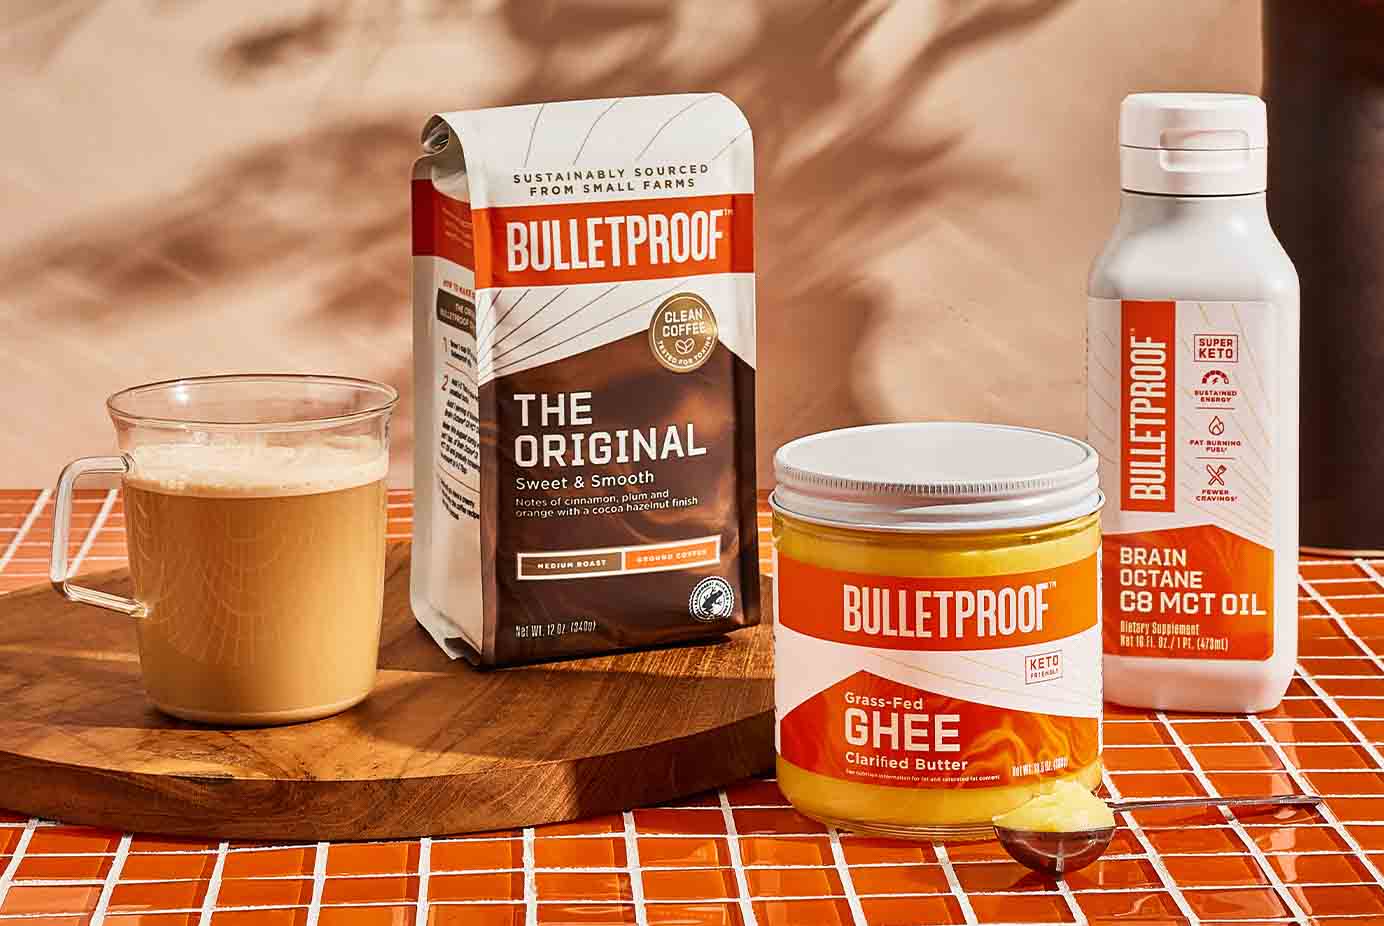 Bulletproof coffee recipe products and ingredients